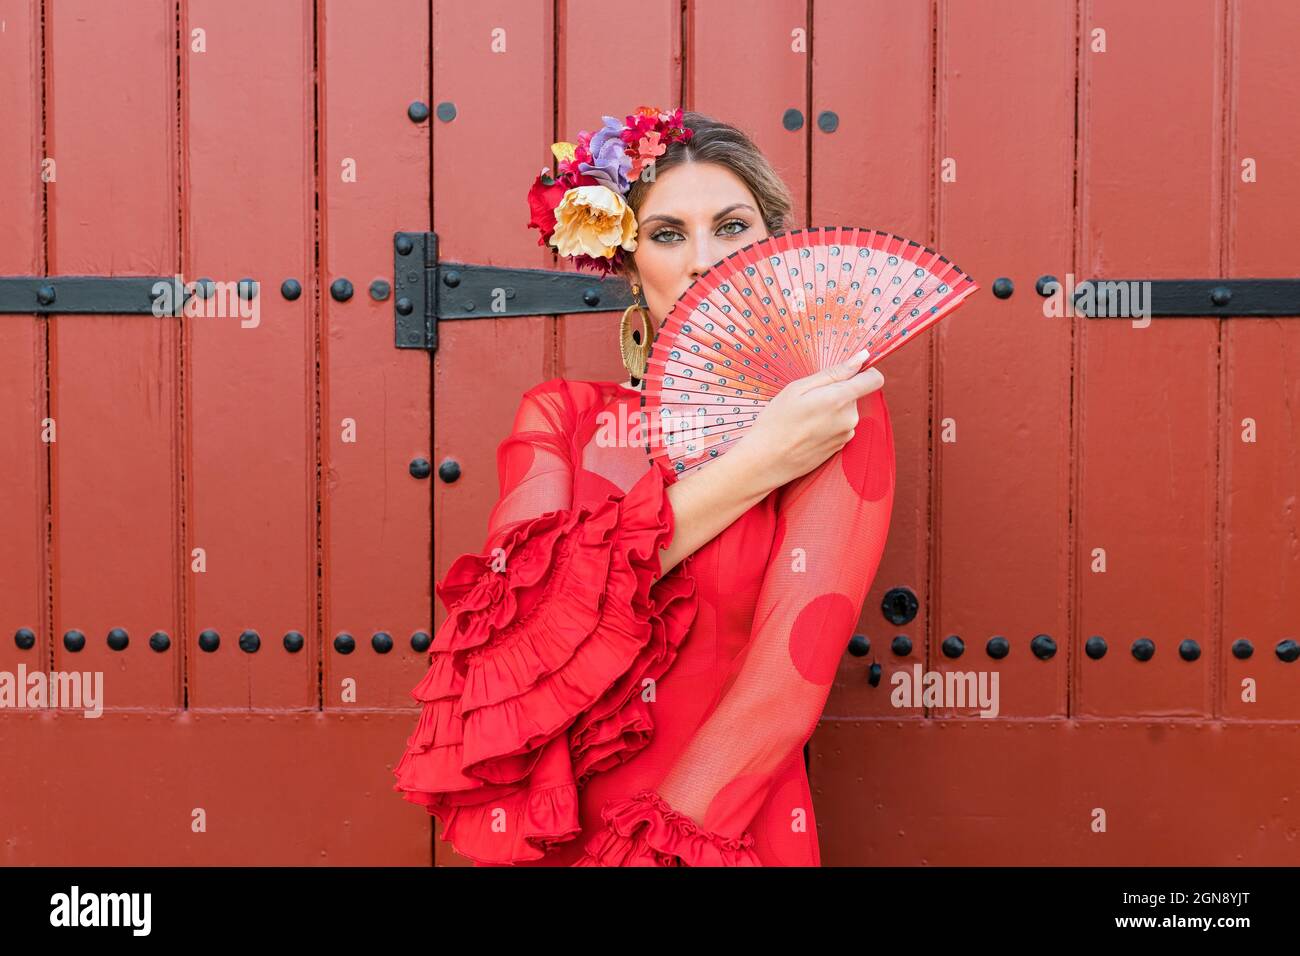 Female flamenco artist in traditional red dress holding hand fan Stock Photo